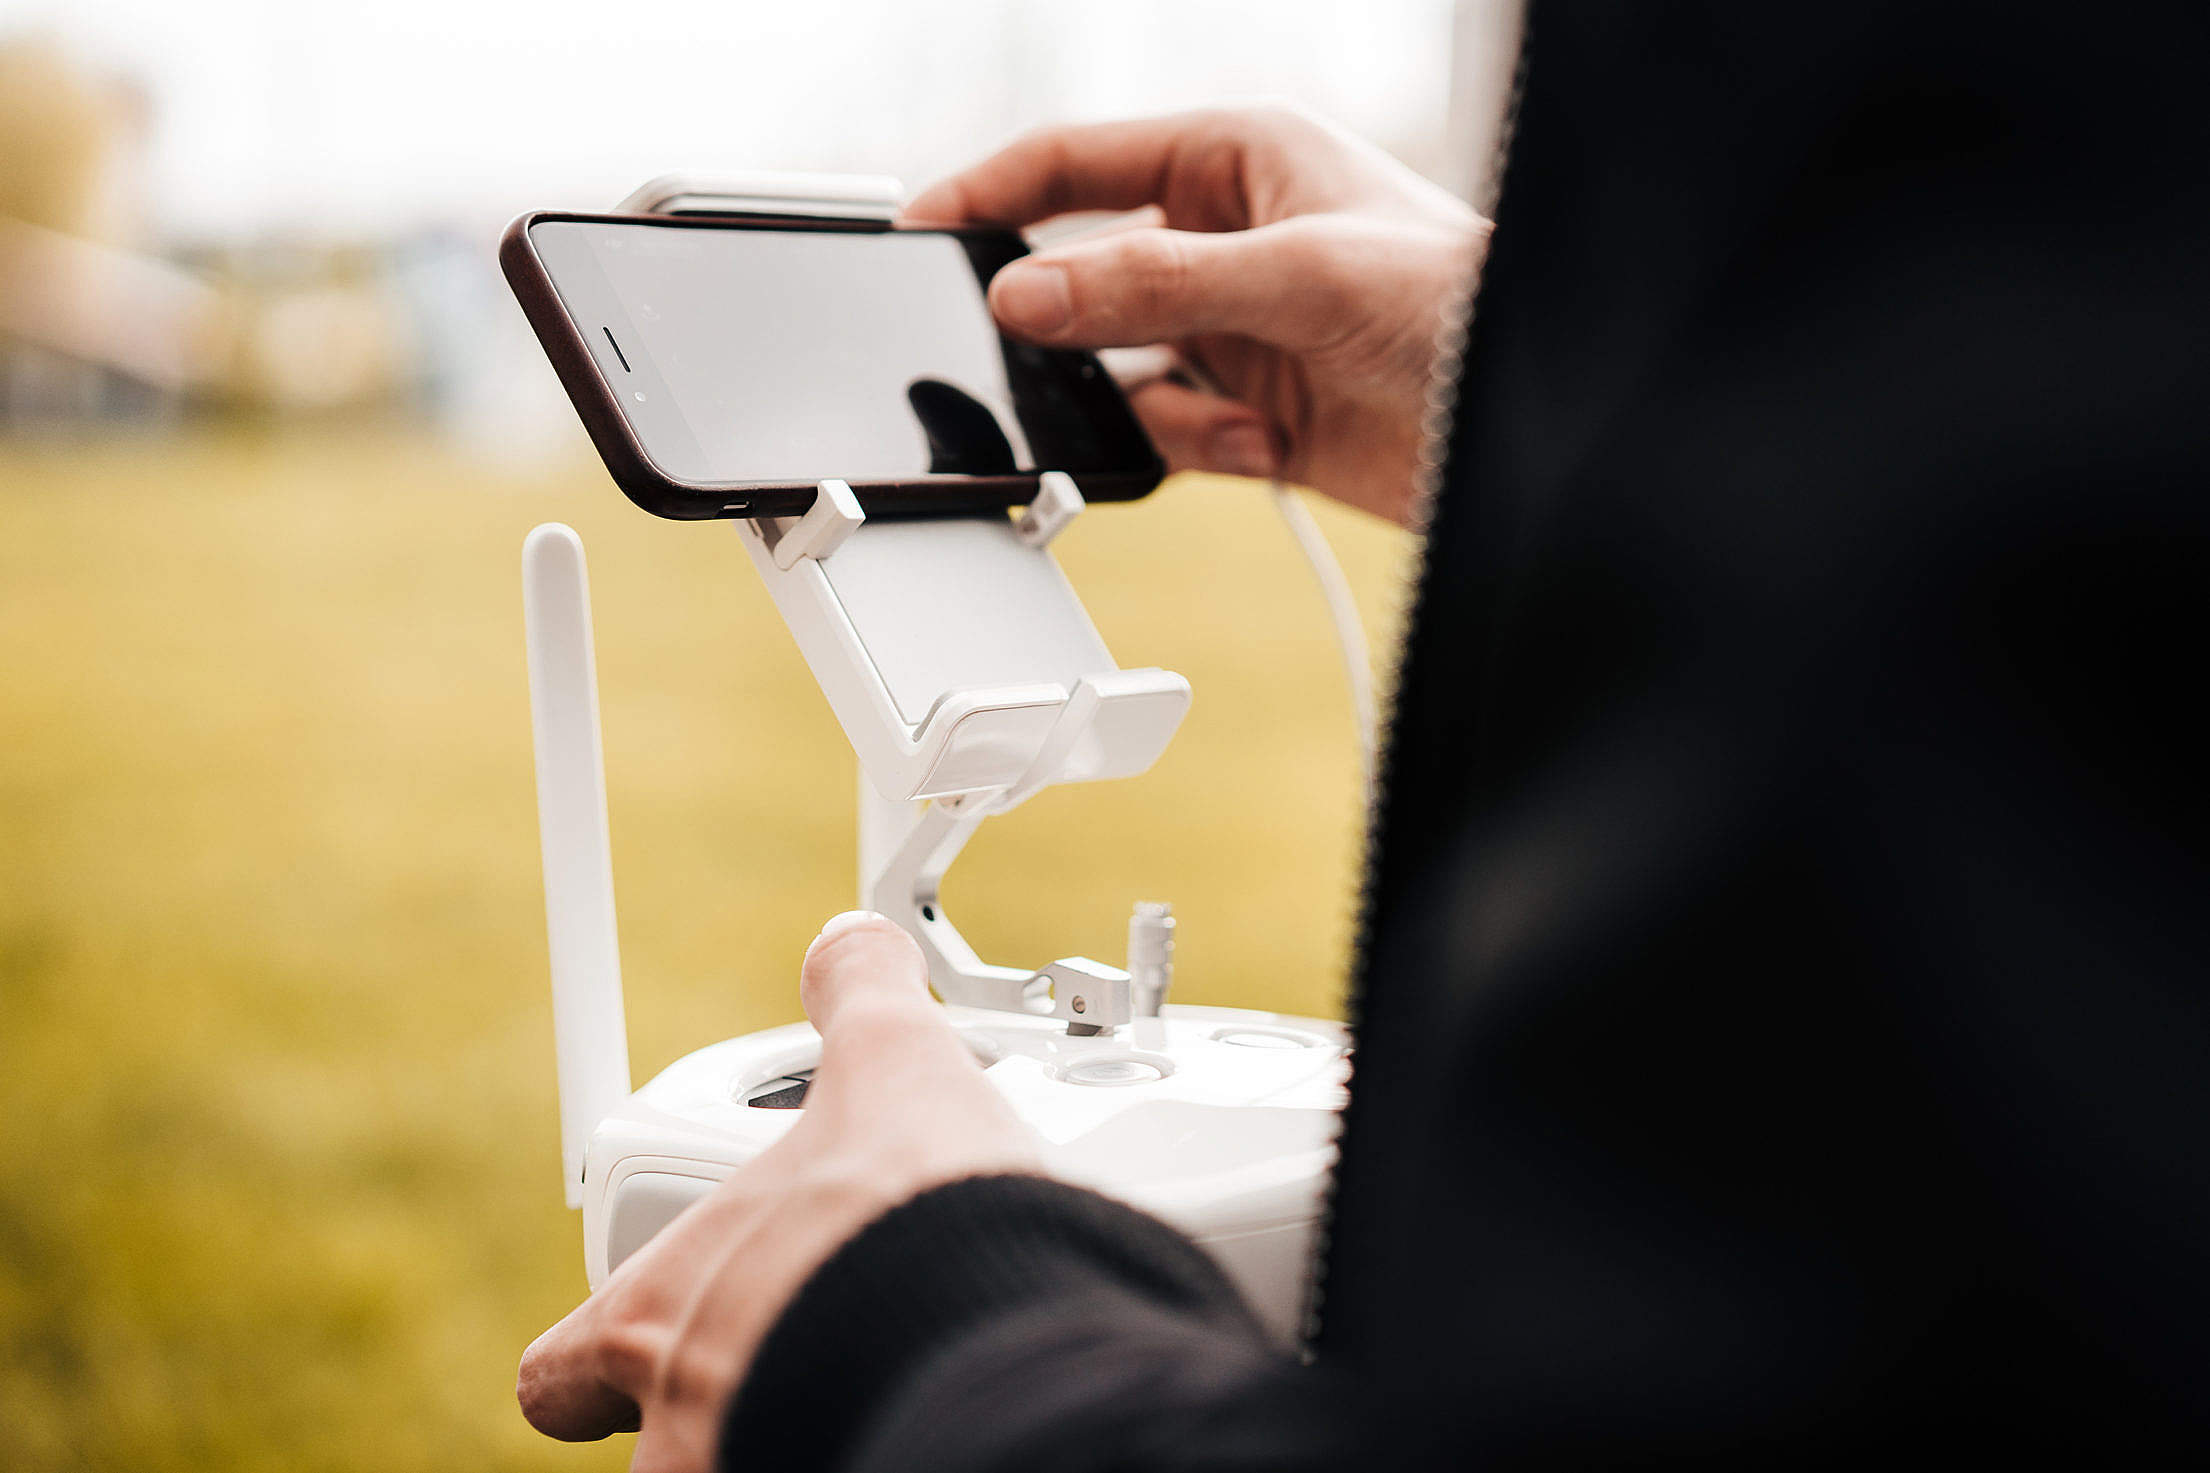 Pilot Controlling FPV Drone with Smarphone Free Stock Photo